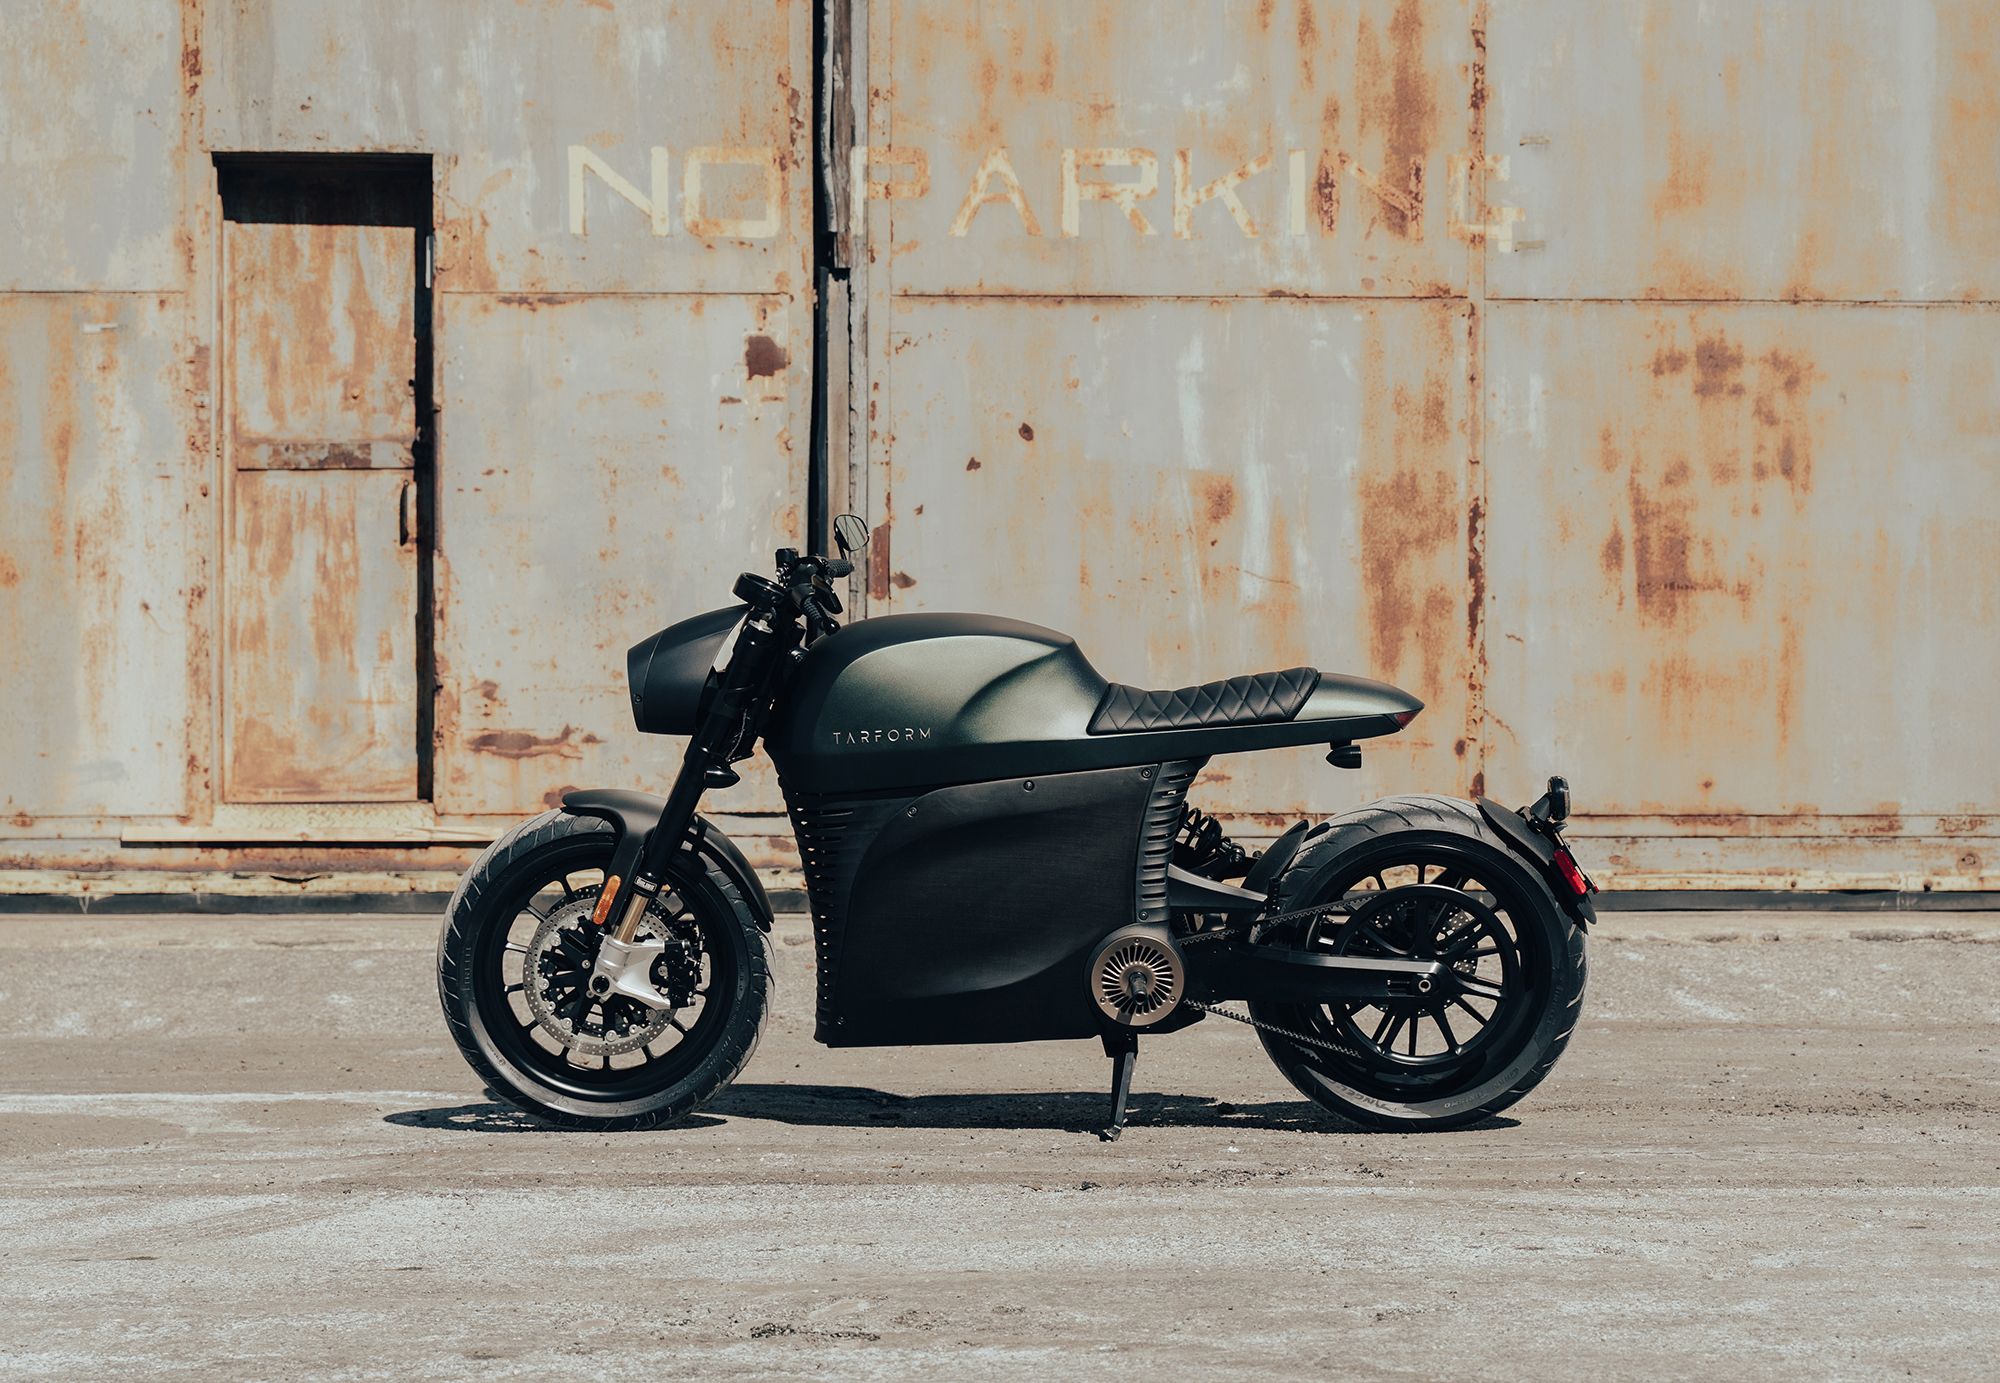 Do Electric Motorcycles Have Gears?